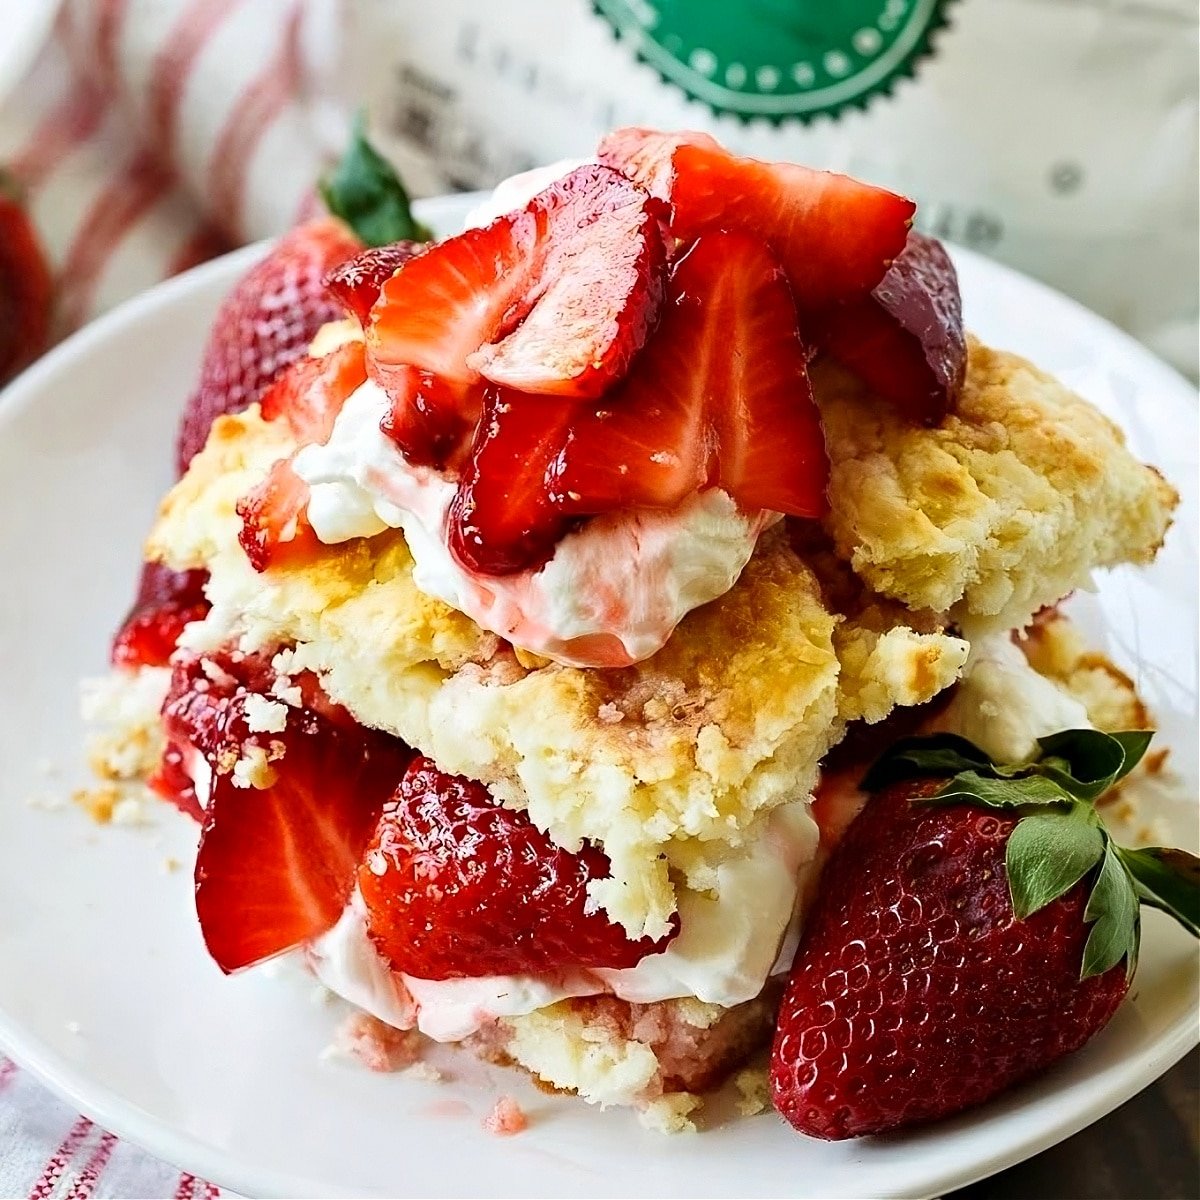 Strawberry Shortcake on a small plate.